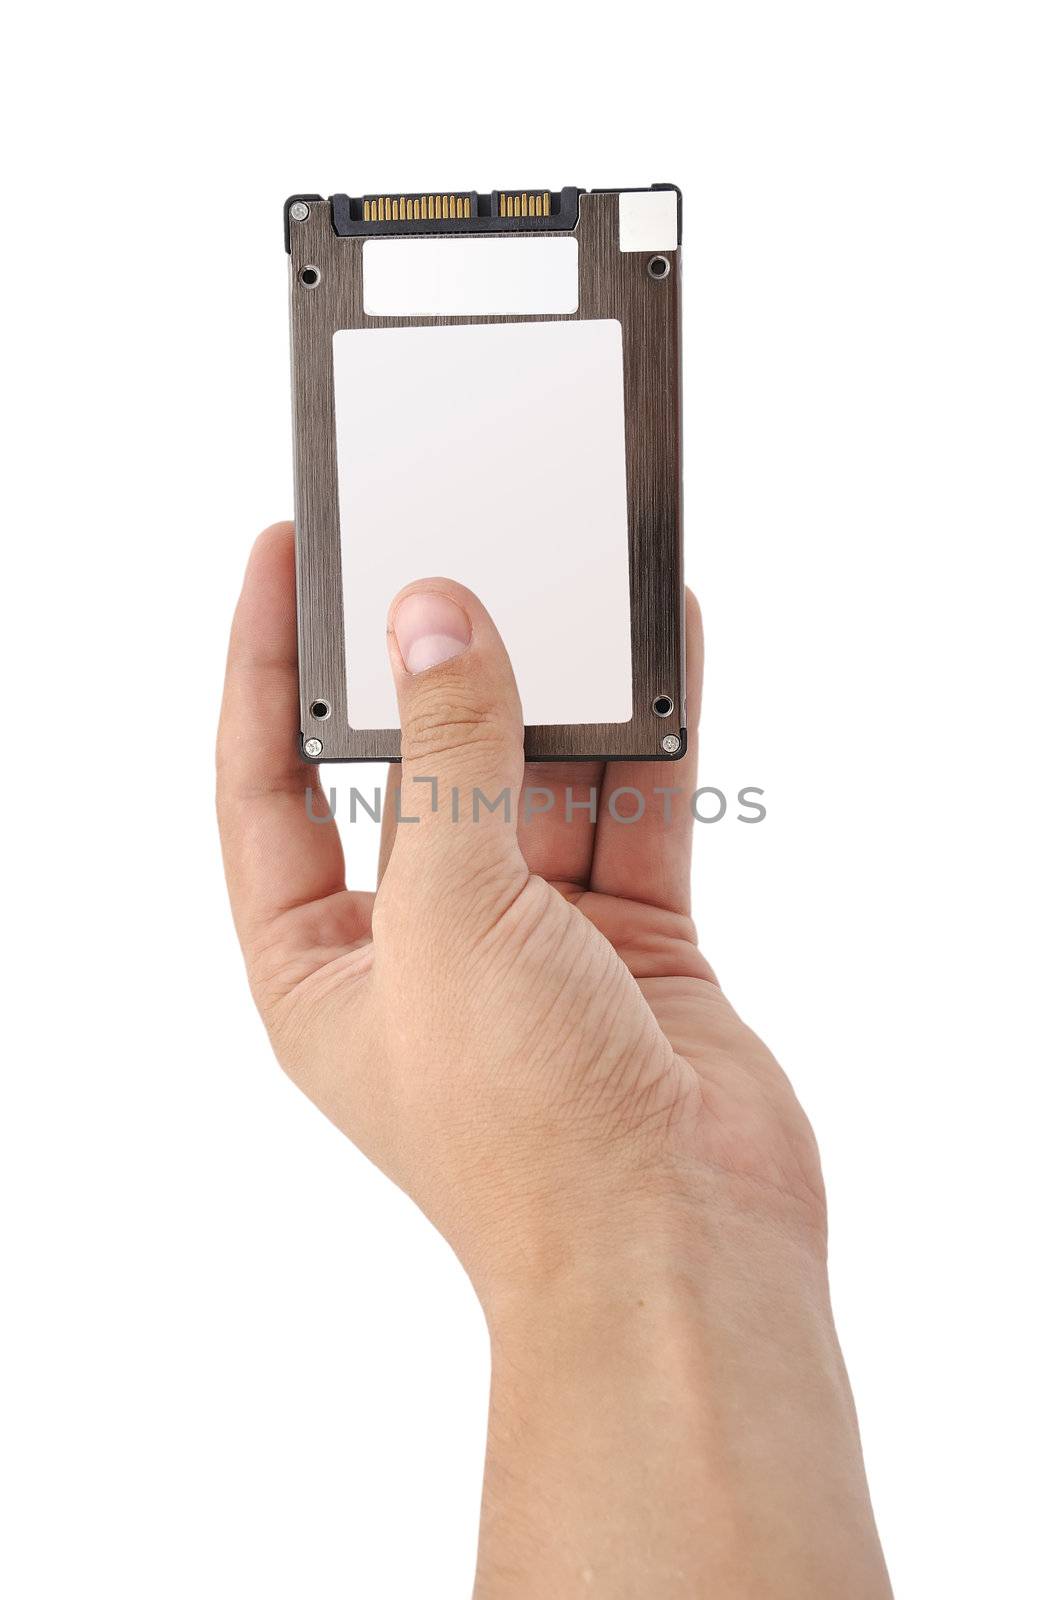 ssd  in hand on a white background